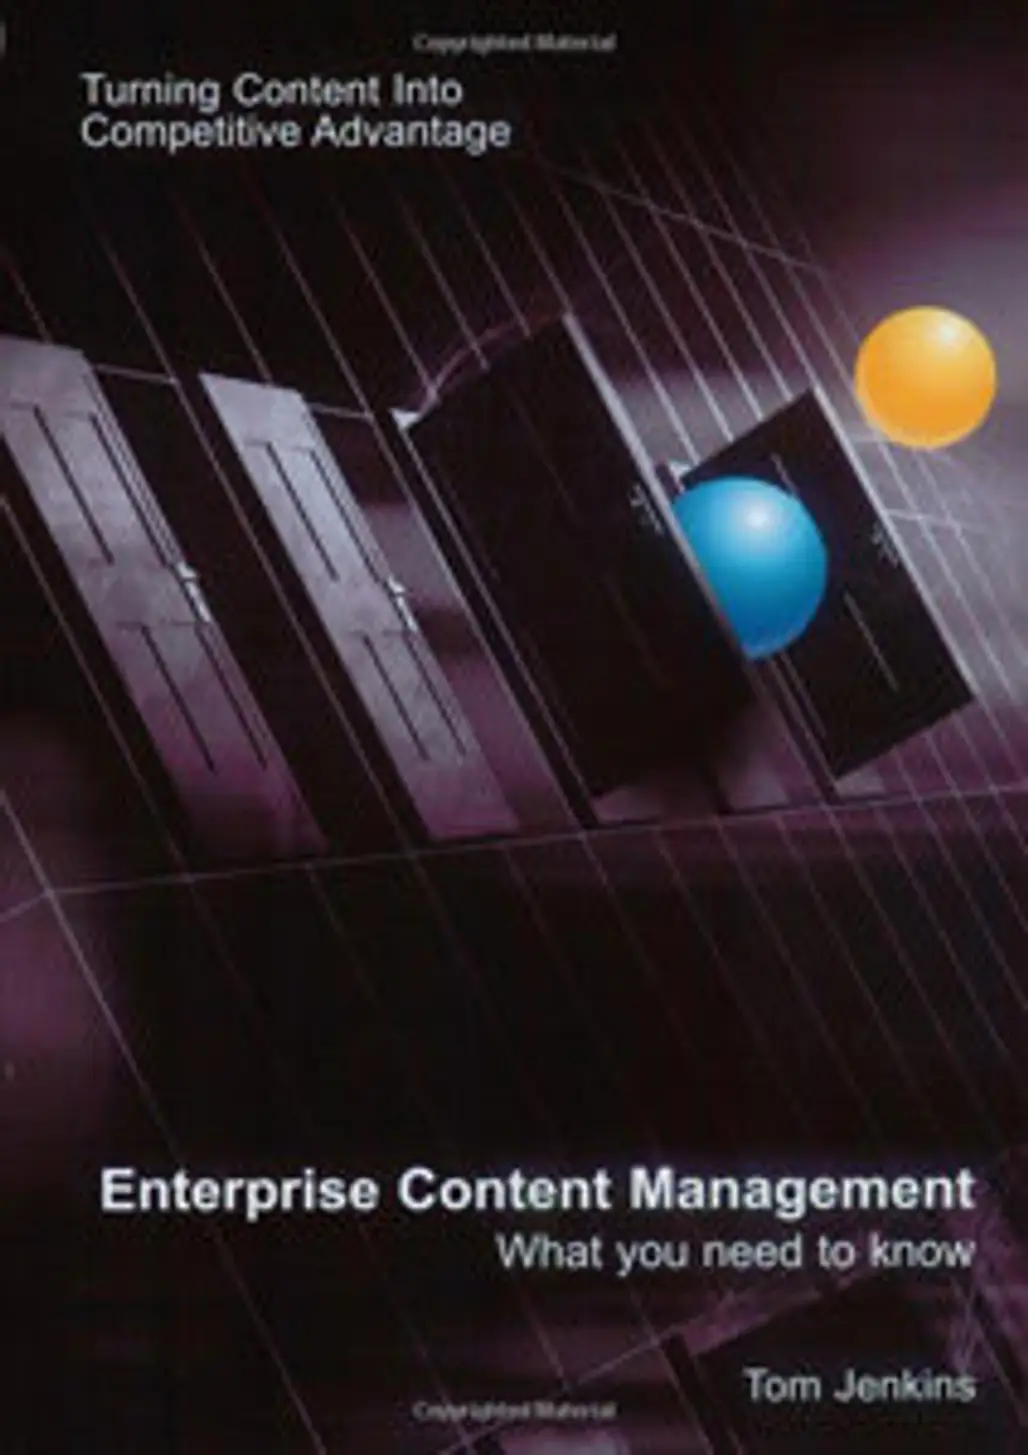 Enterprise Content Management Technology: What You Need to Know